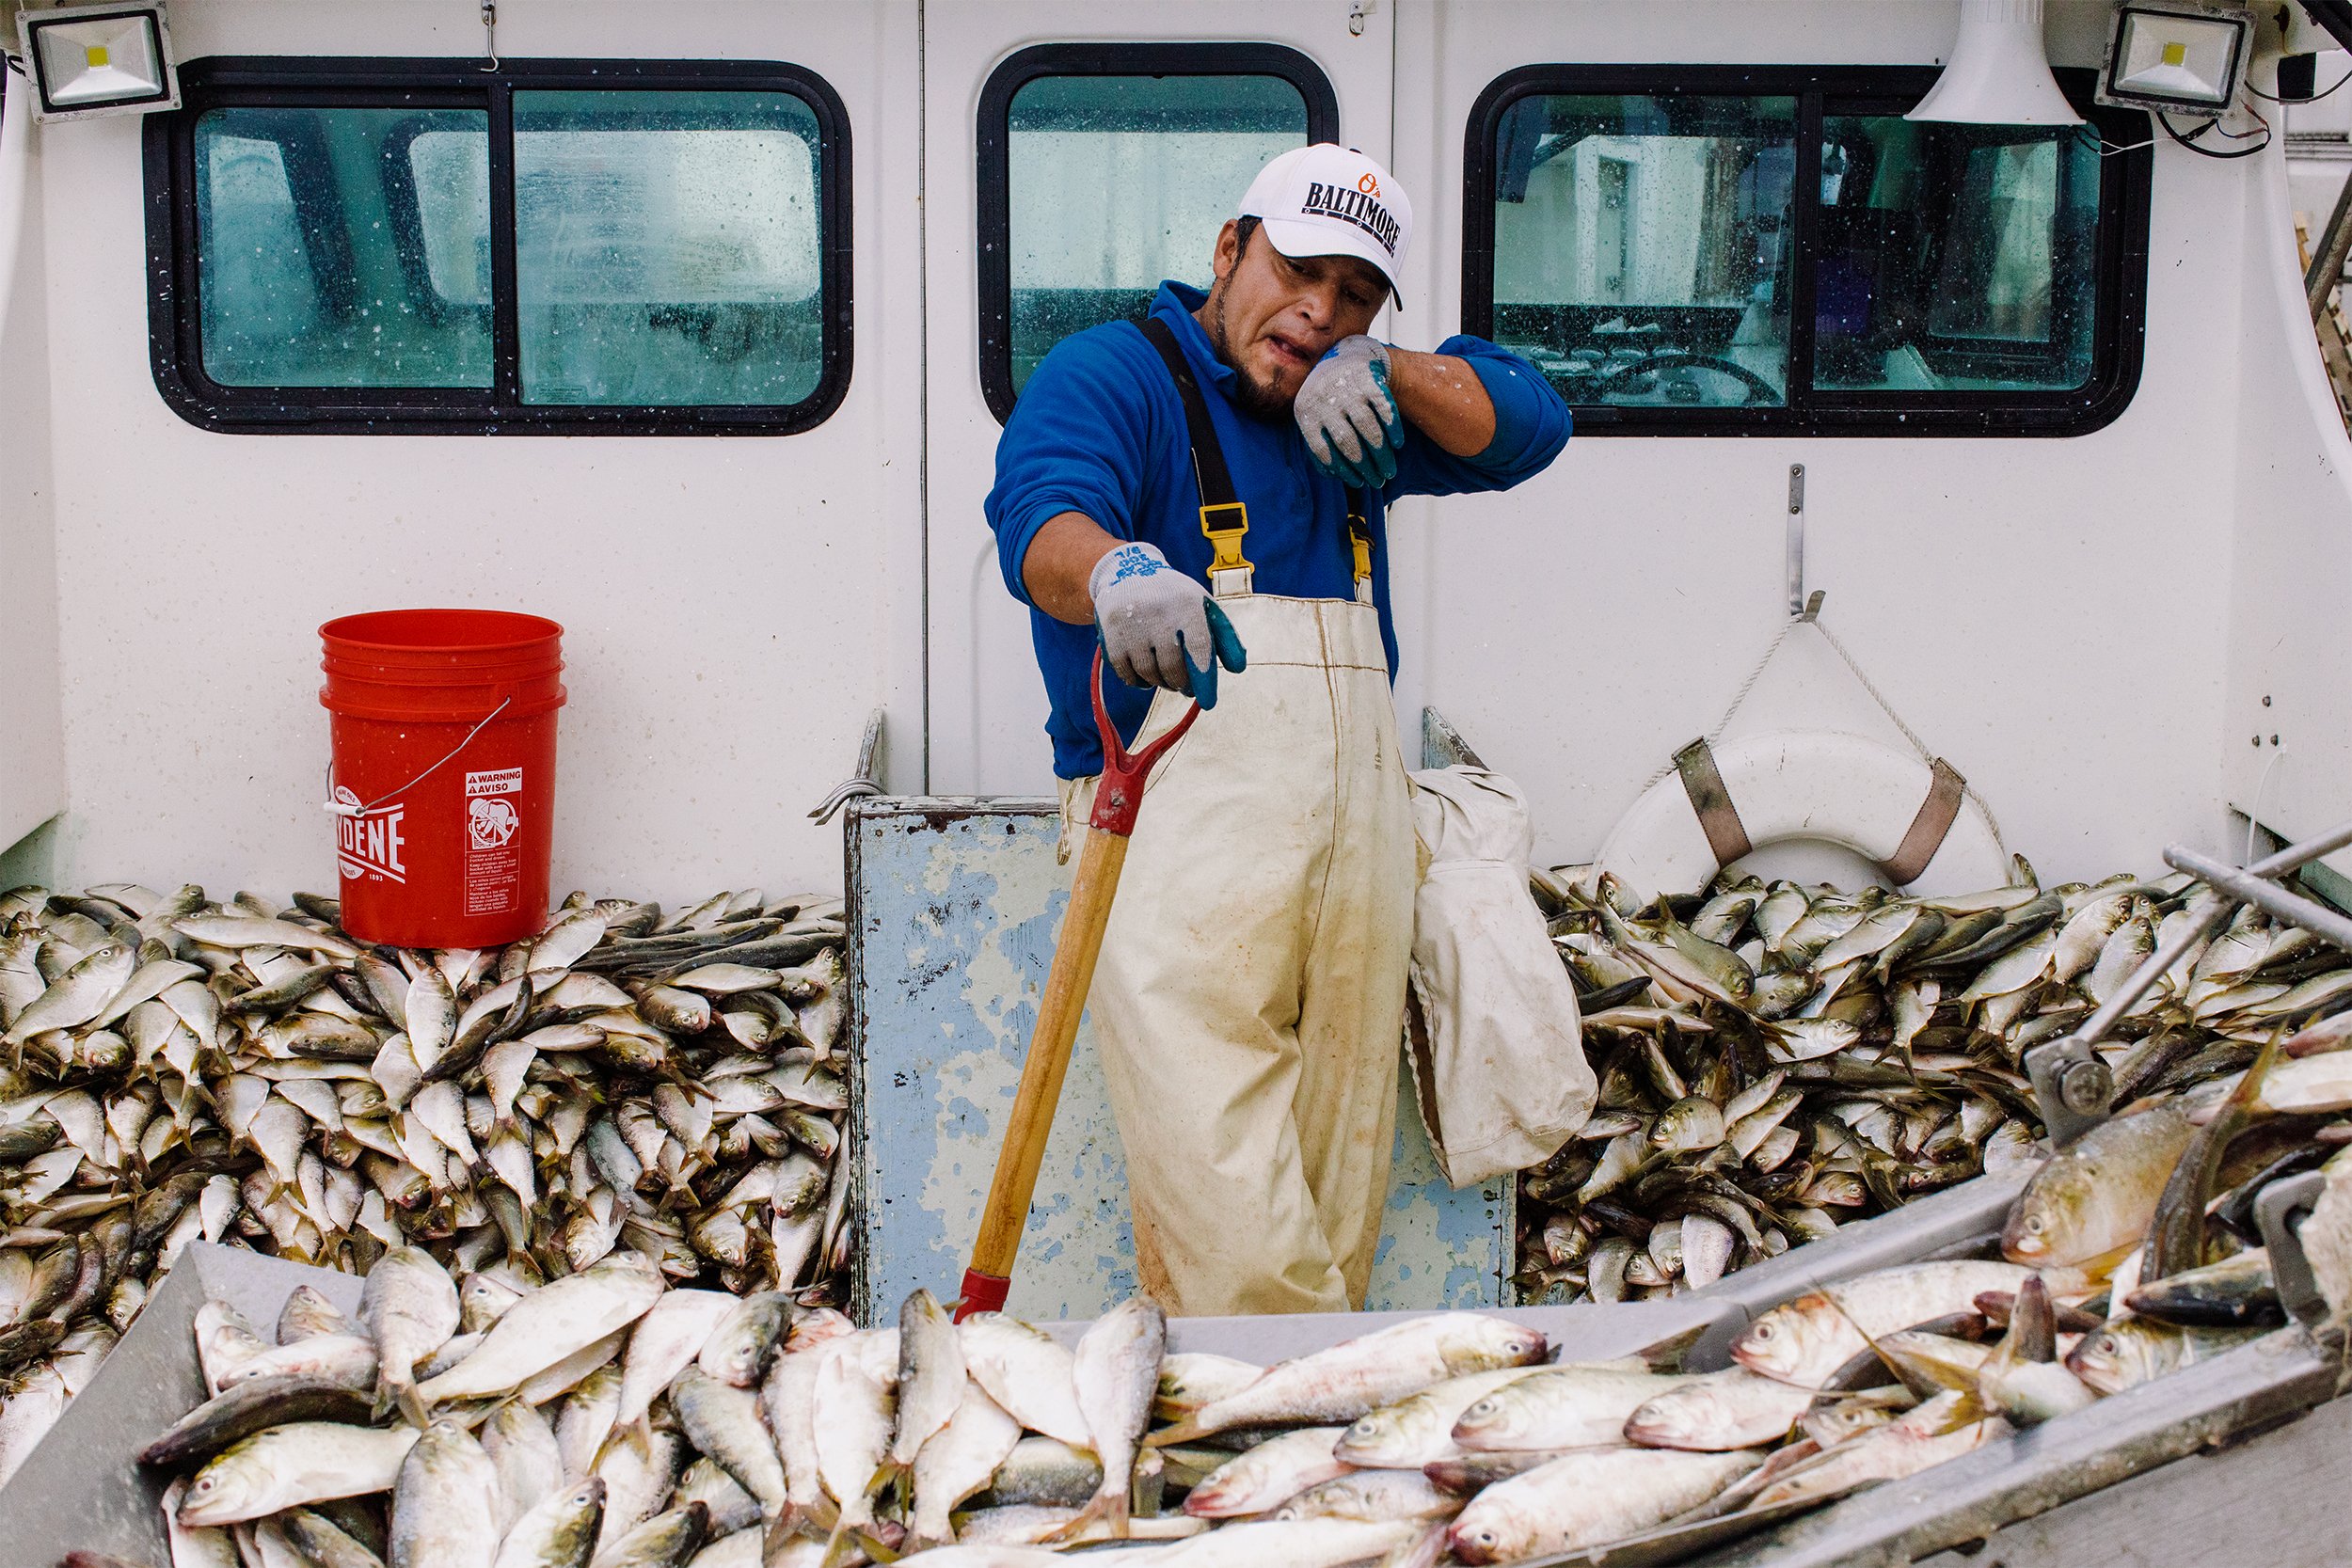  Edgar Riber wipes his face while shoveling menhaden onto a conveyor belt at Russel Hall Seafood in Hoopers Island. Much of the fishing industry is supported by Latinos that come to the United States on H-2B work visas. Catching sleep while on the bo